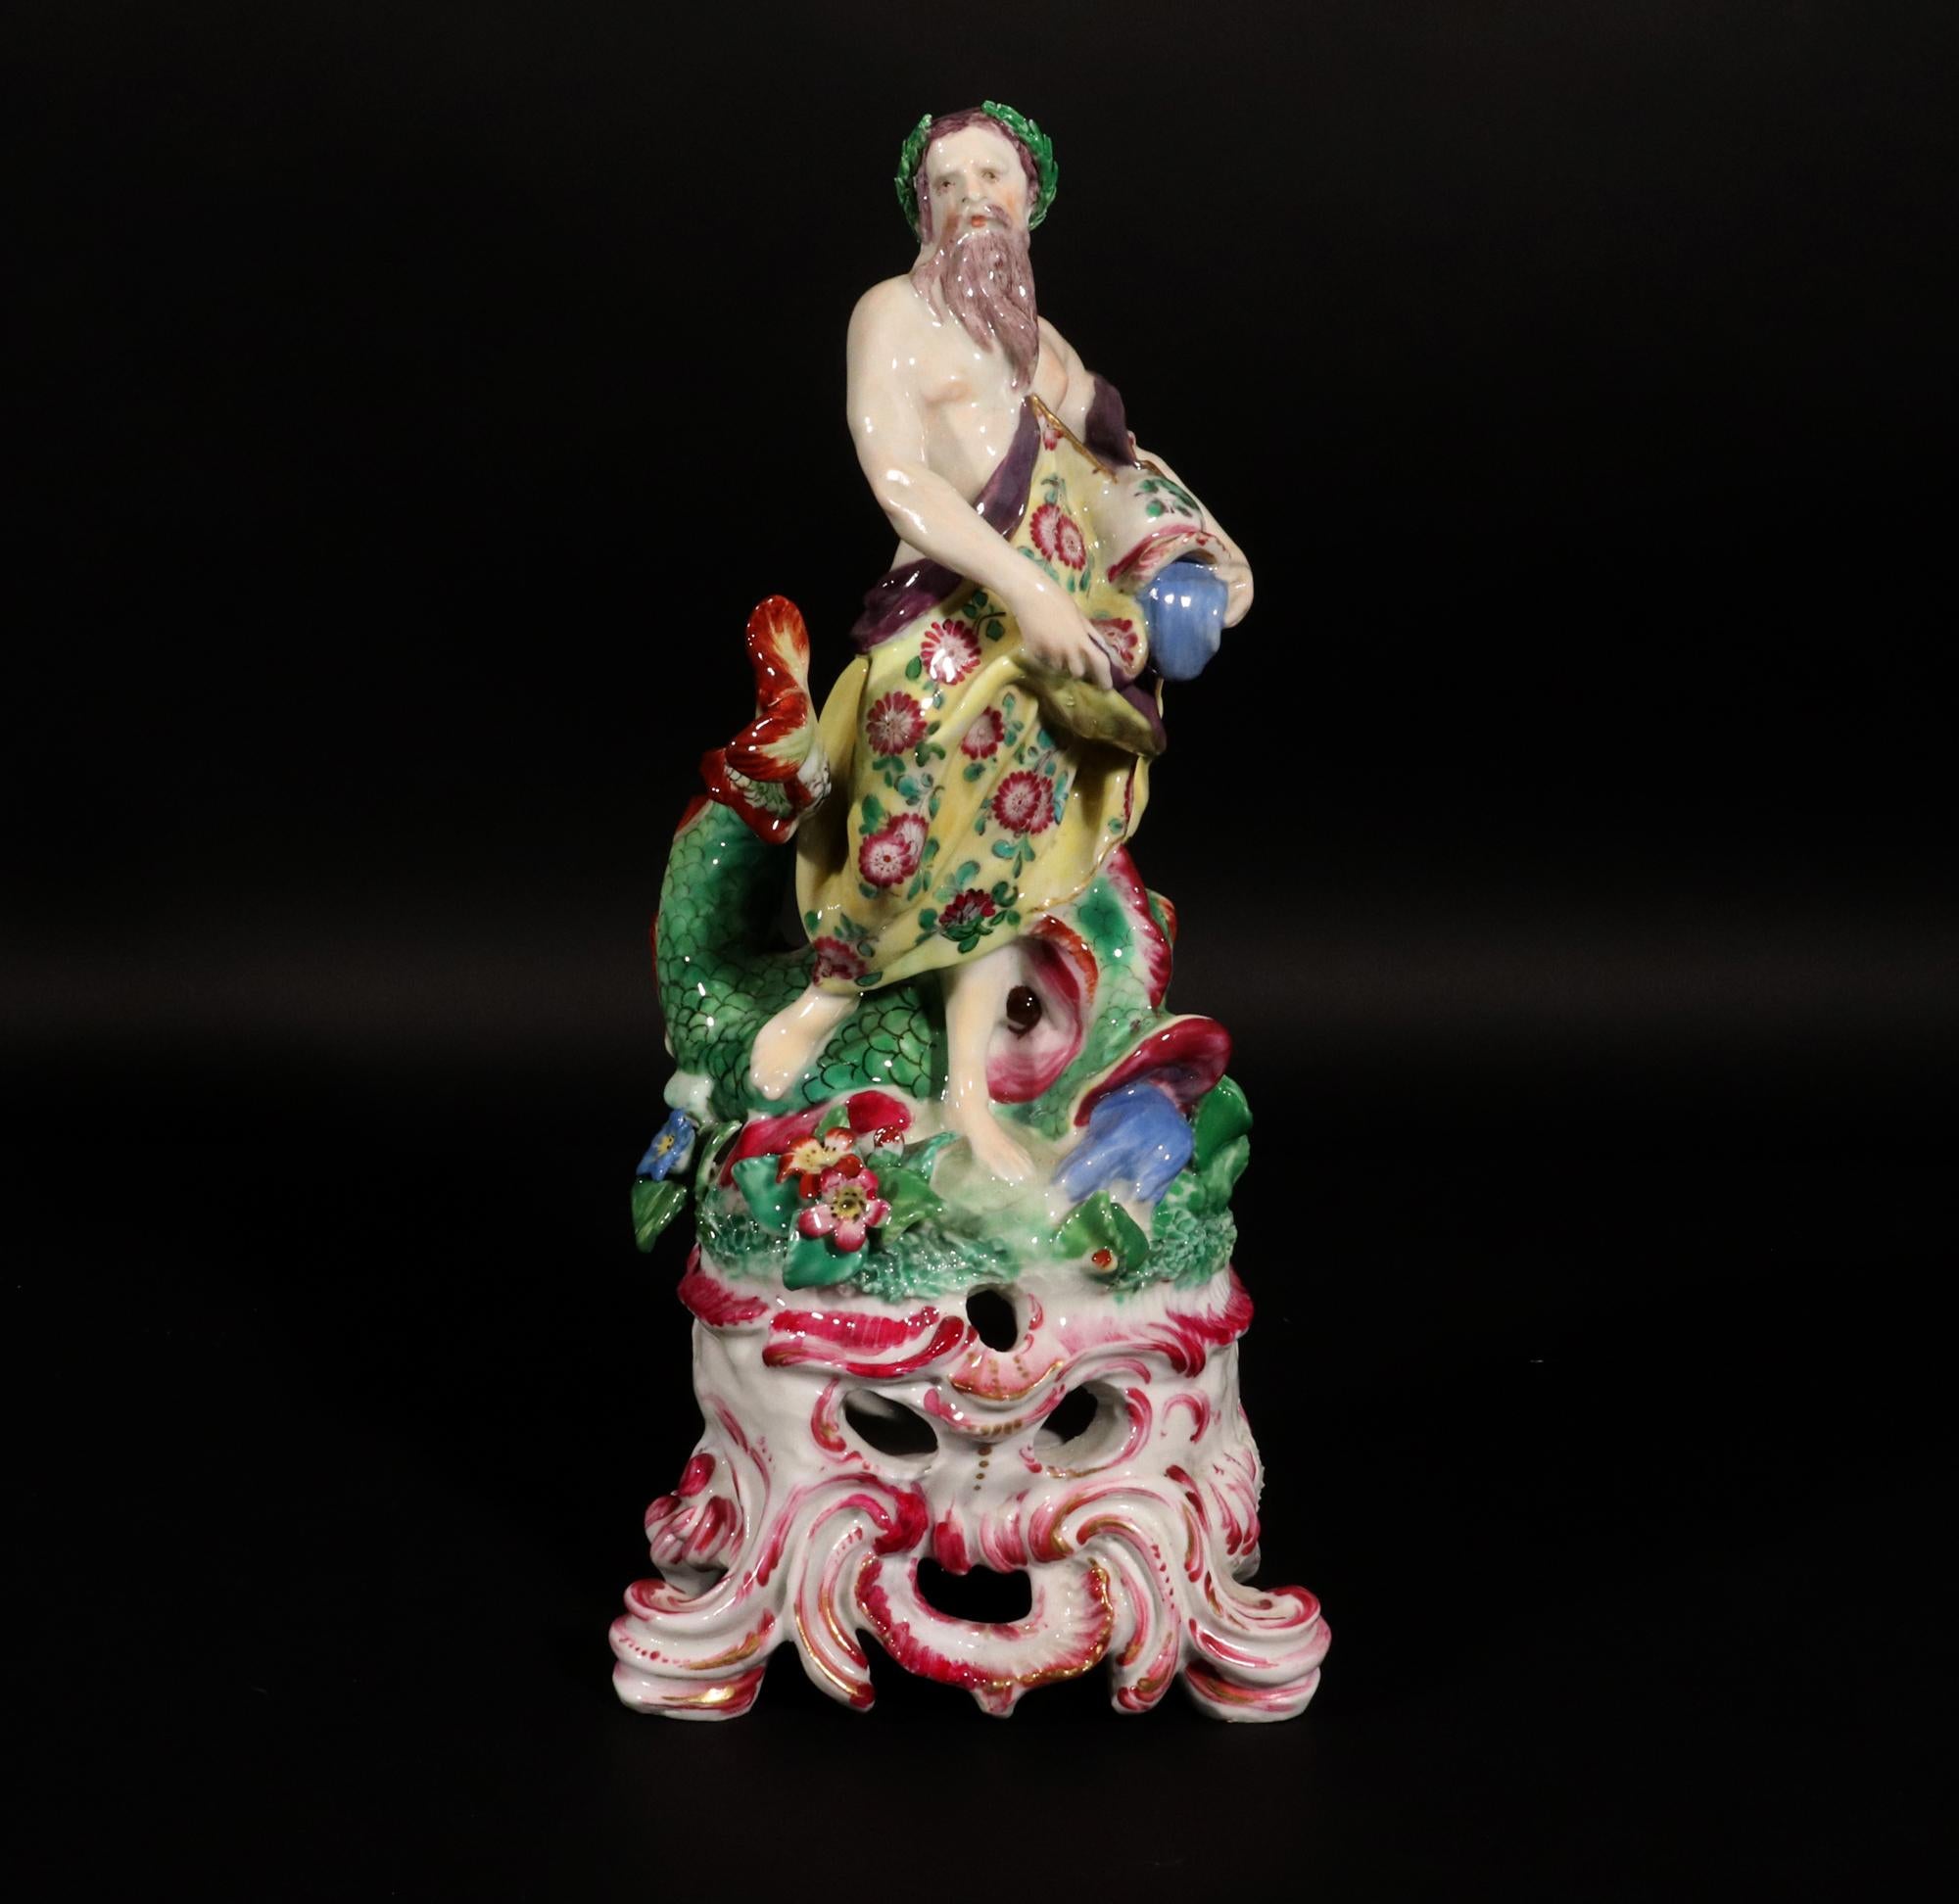 Bow Porcelain Rococo Figure of Neptune,
Circa 1760-65

The figure is a stunning example of English Rococo period porcelain.  Neptune stands on a grassy mound with pink flowers at his feet.  He wears a yellow robe decorated with flowers.  He holds a